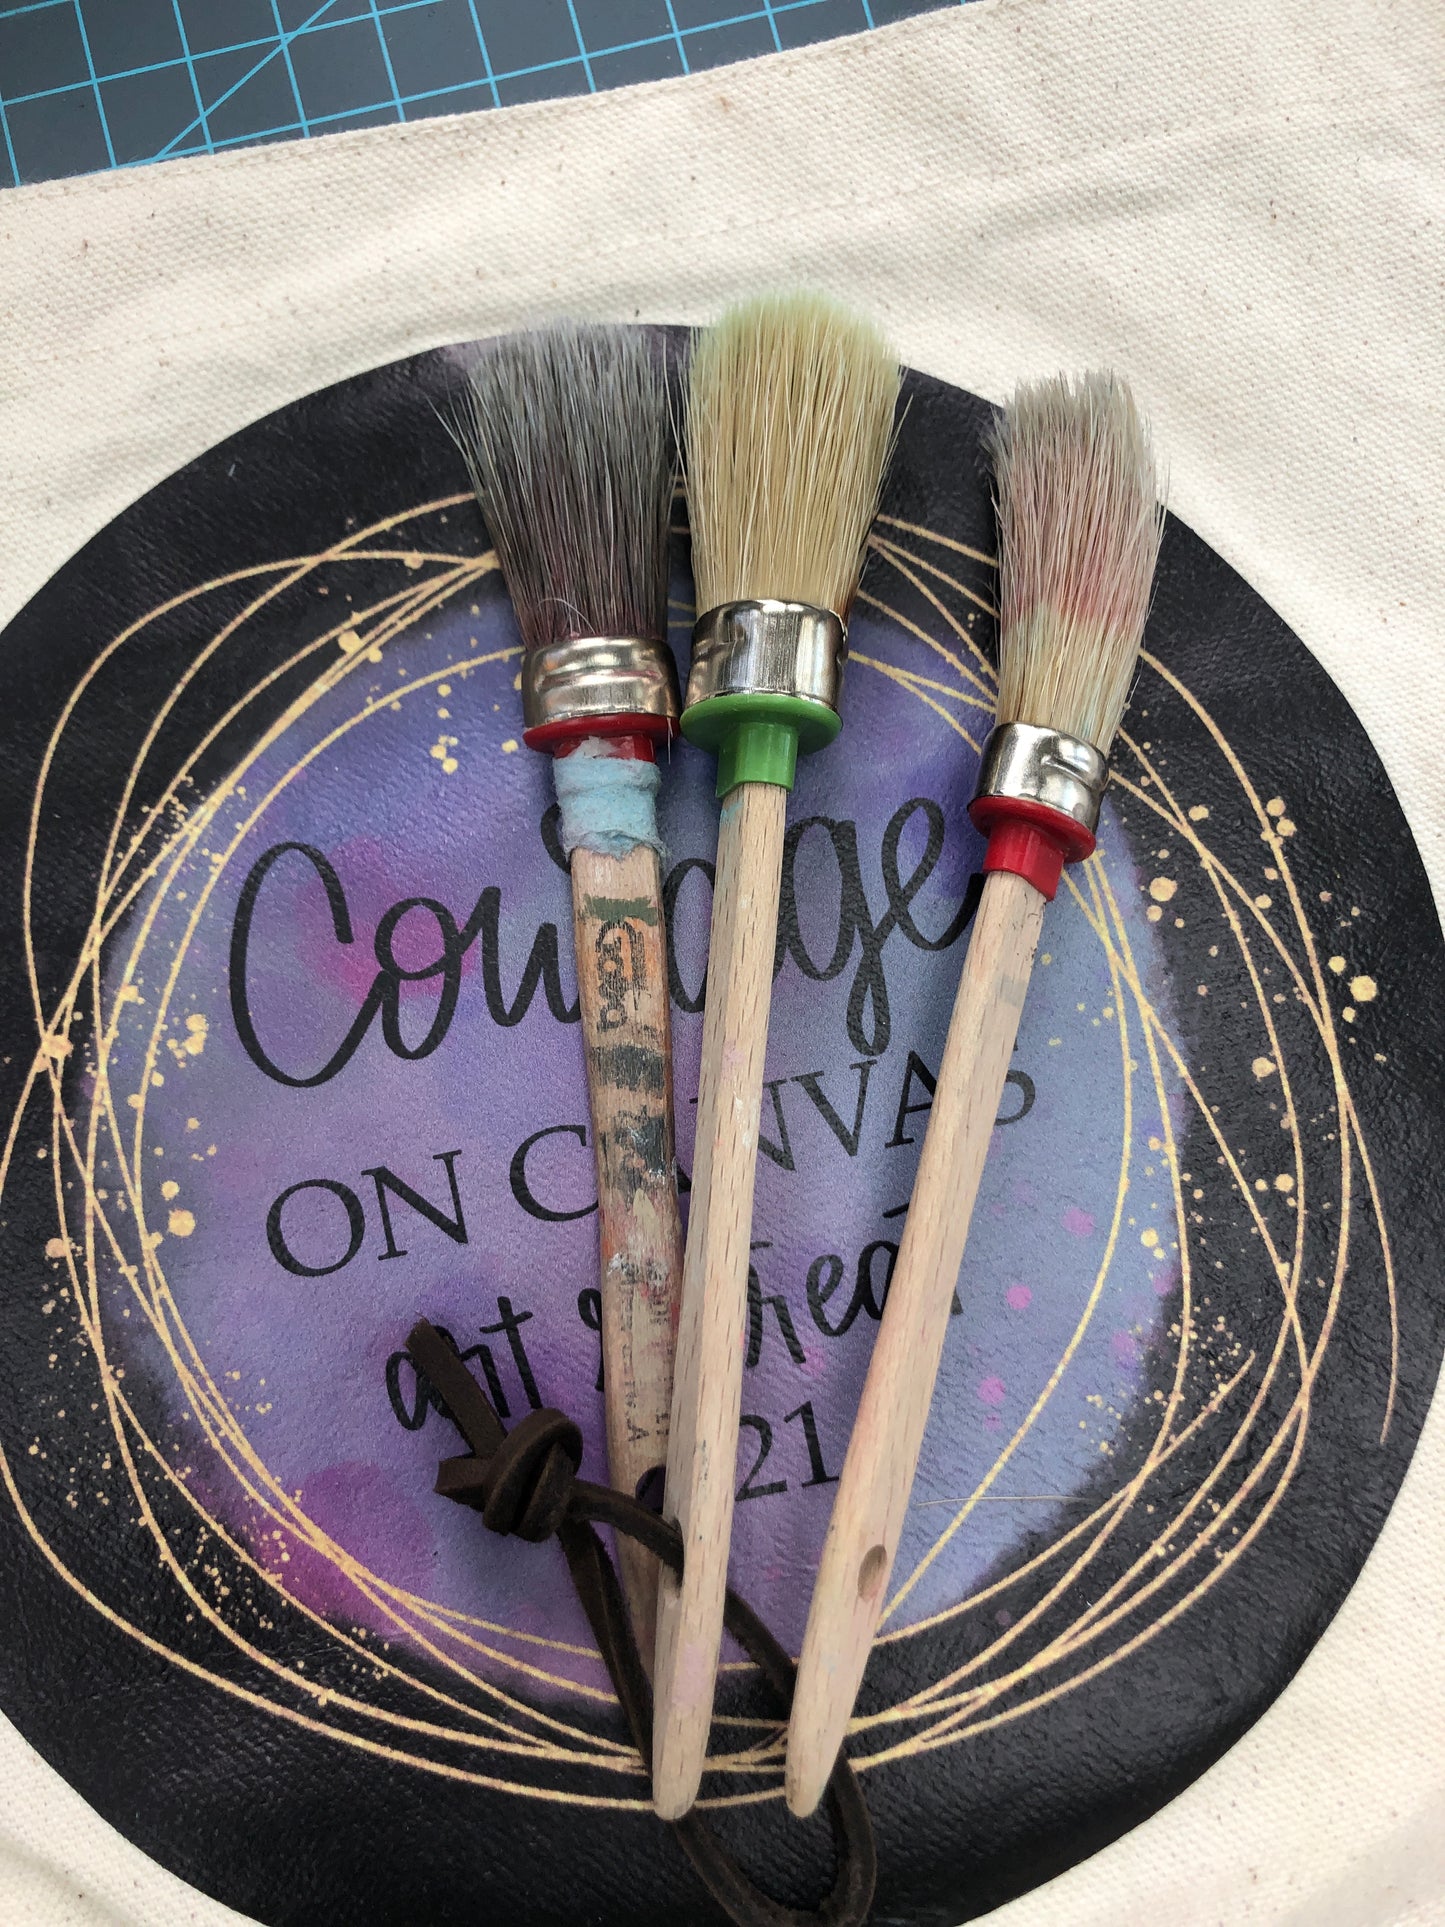 Pre-Owned Chalk Paint Brushes, $3 each any size